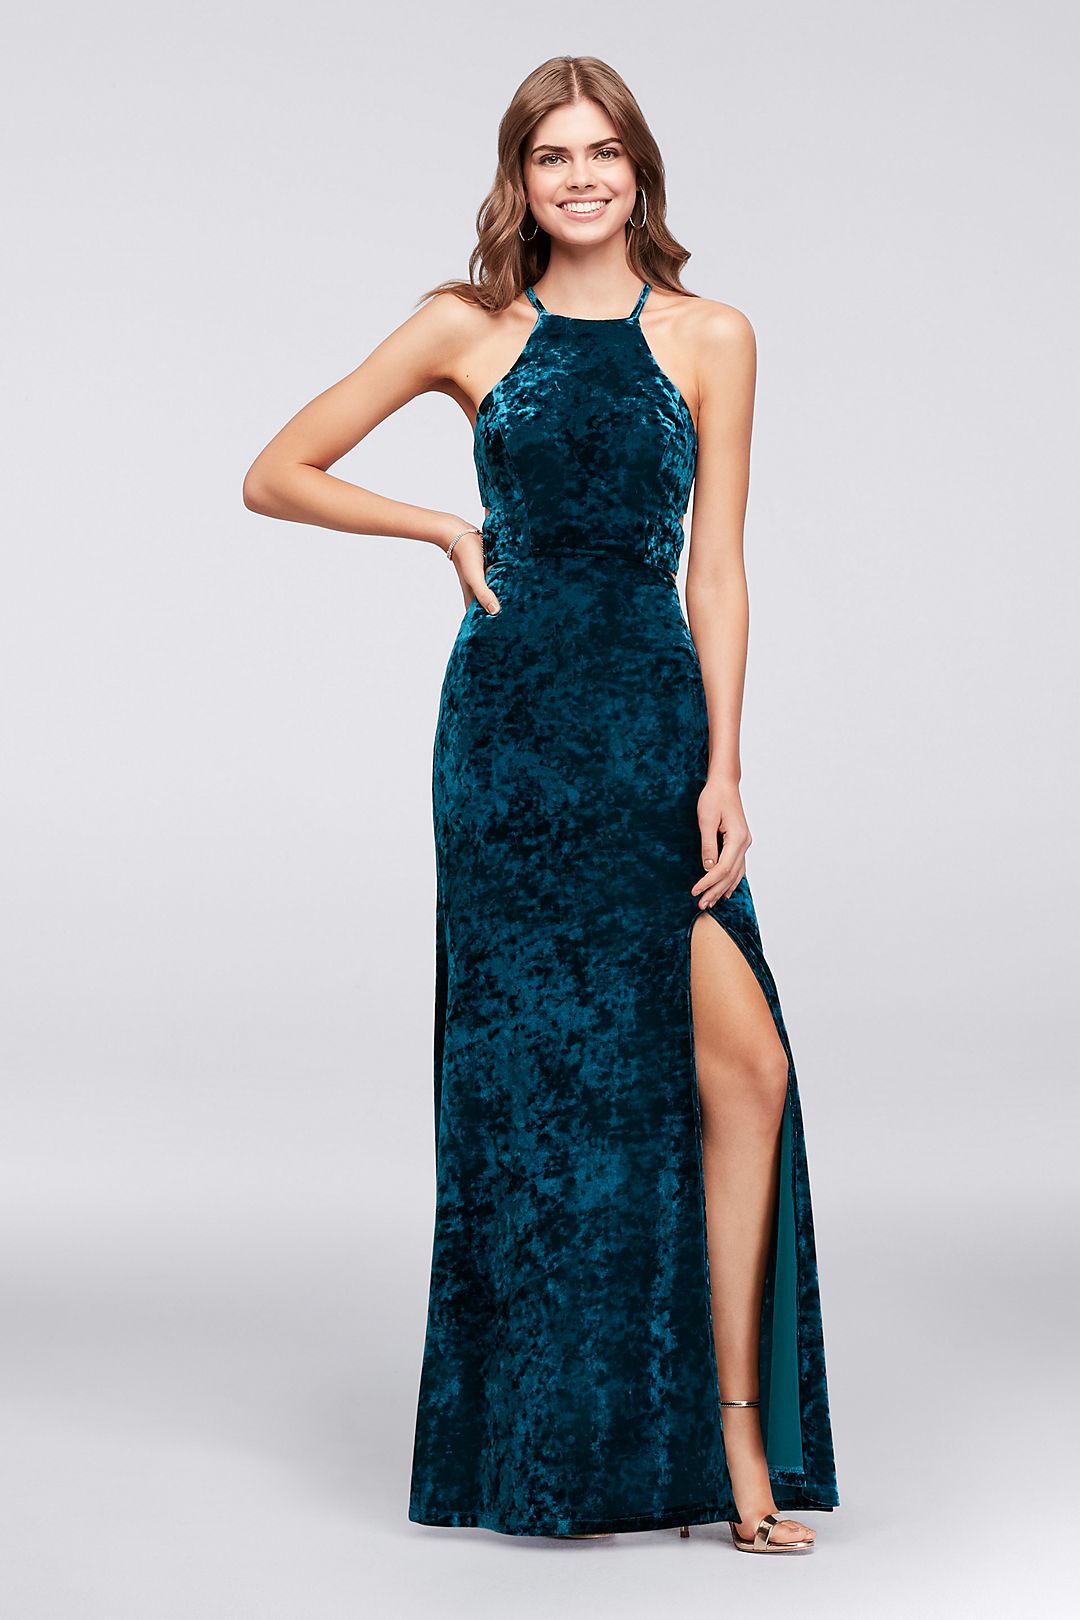 Crushed Velvet Lace-Up Halter Gown Image 1